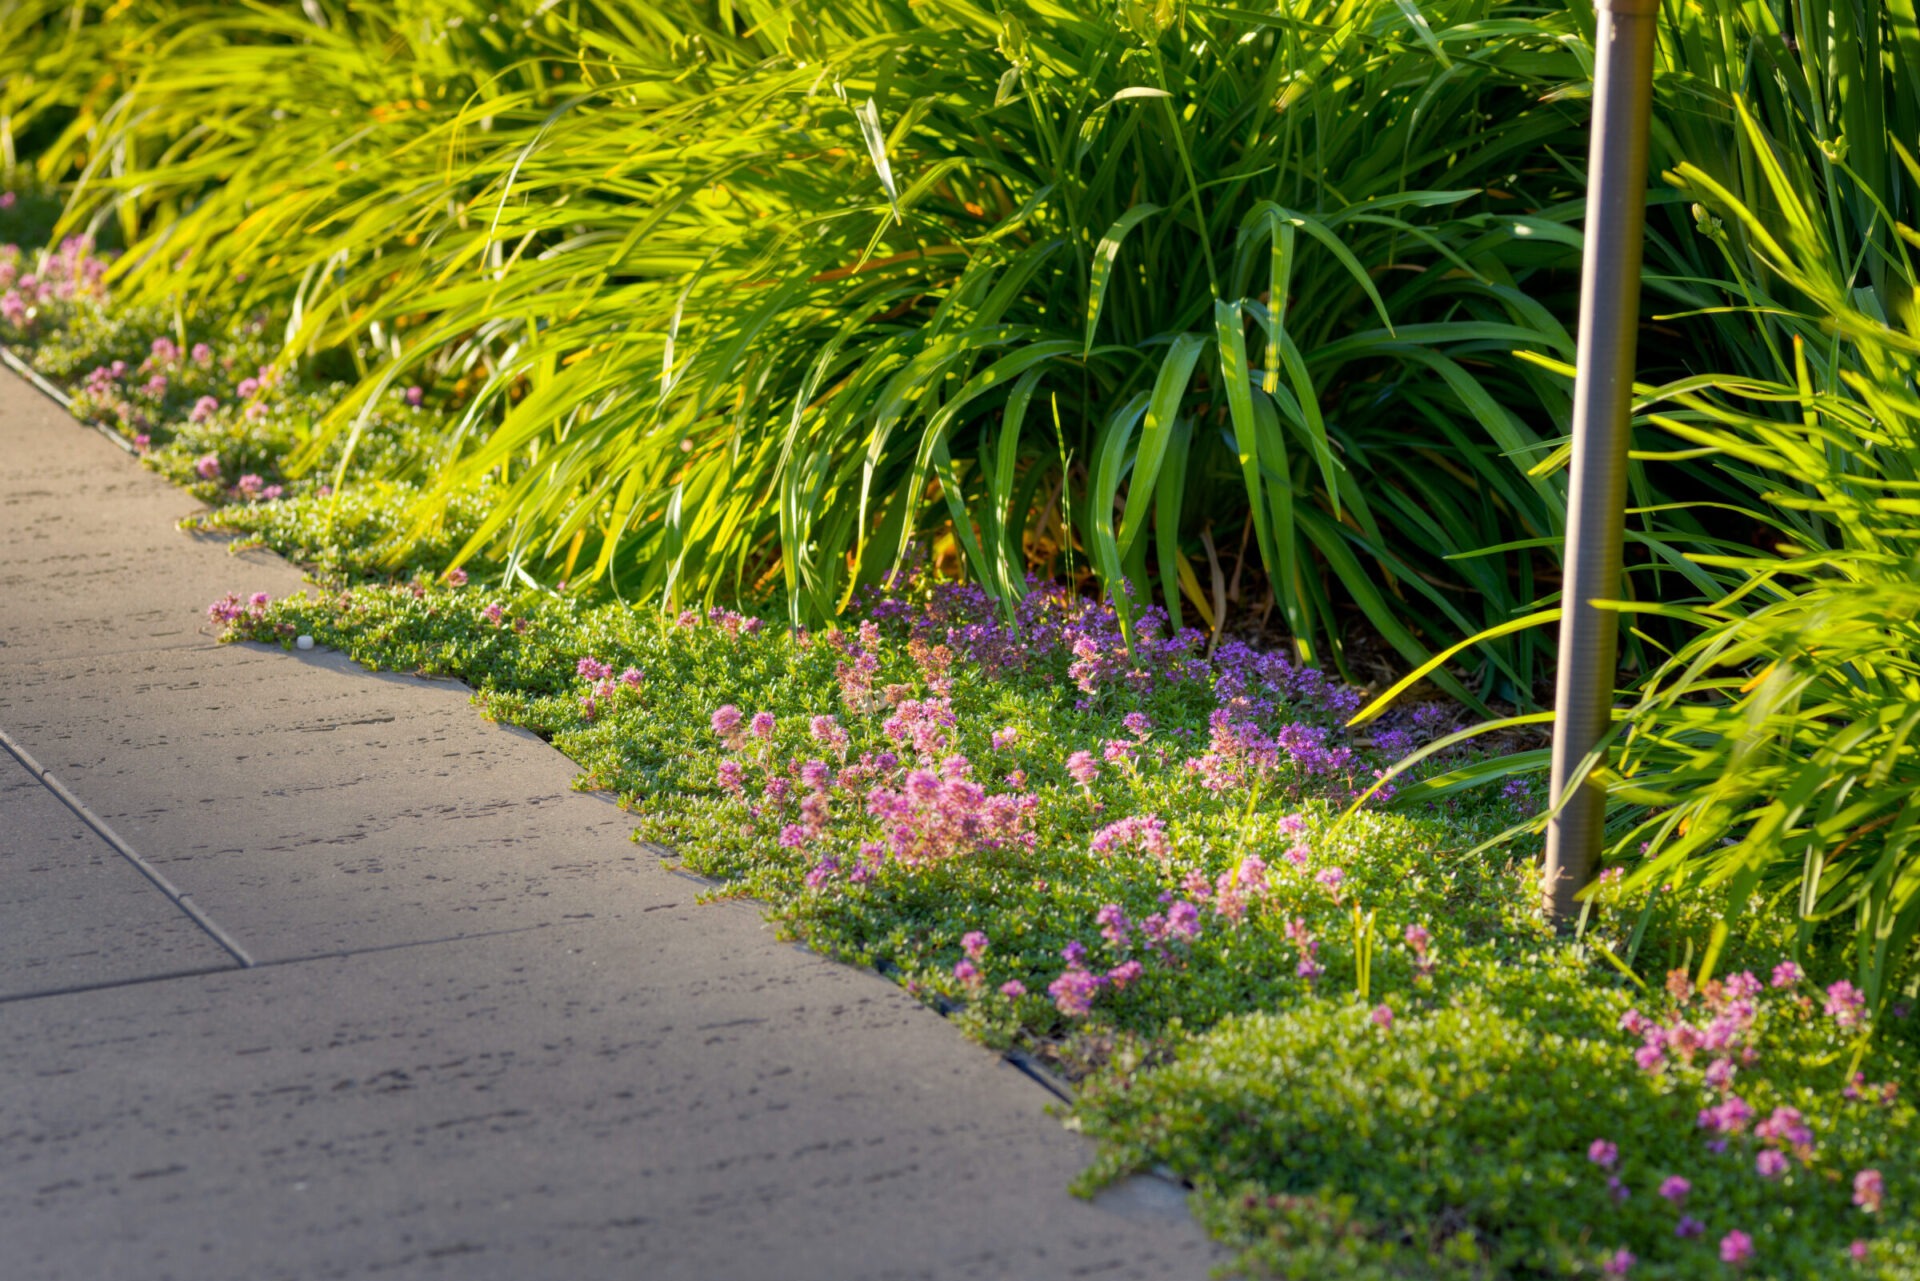 A concrete pathway is lined with lush green shrubs and colorful flowers under warm sunlight, alongside a lamppost and well-manicured grass.